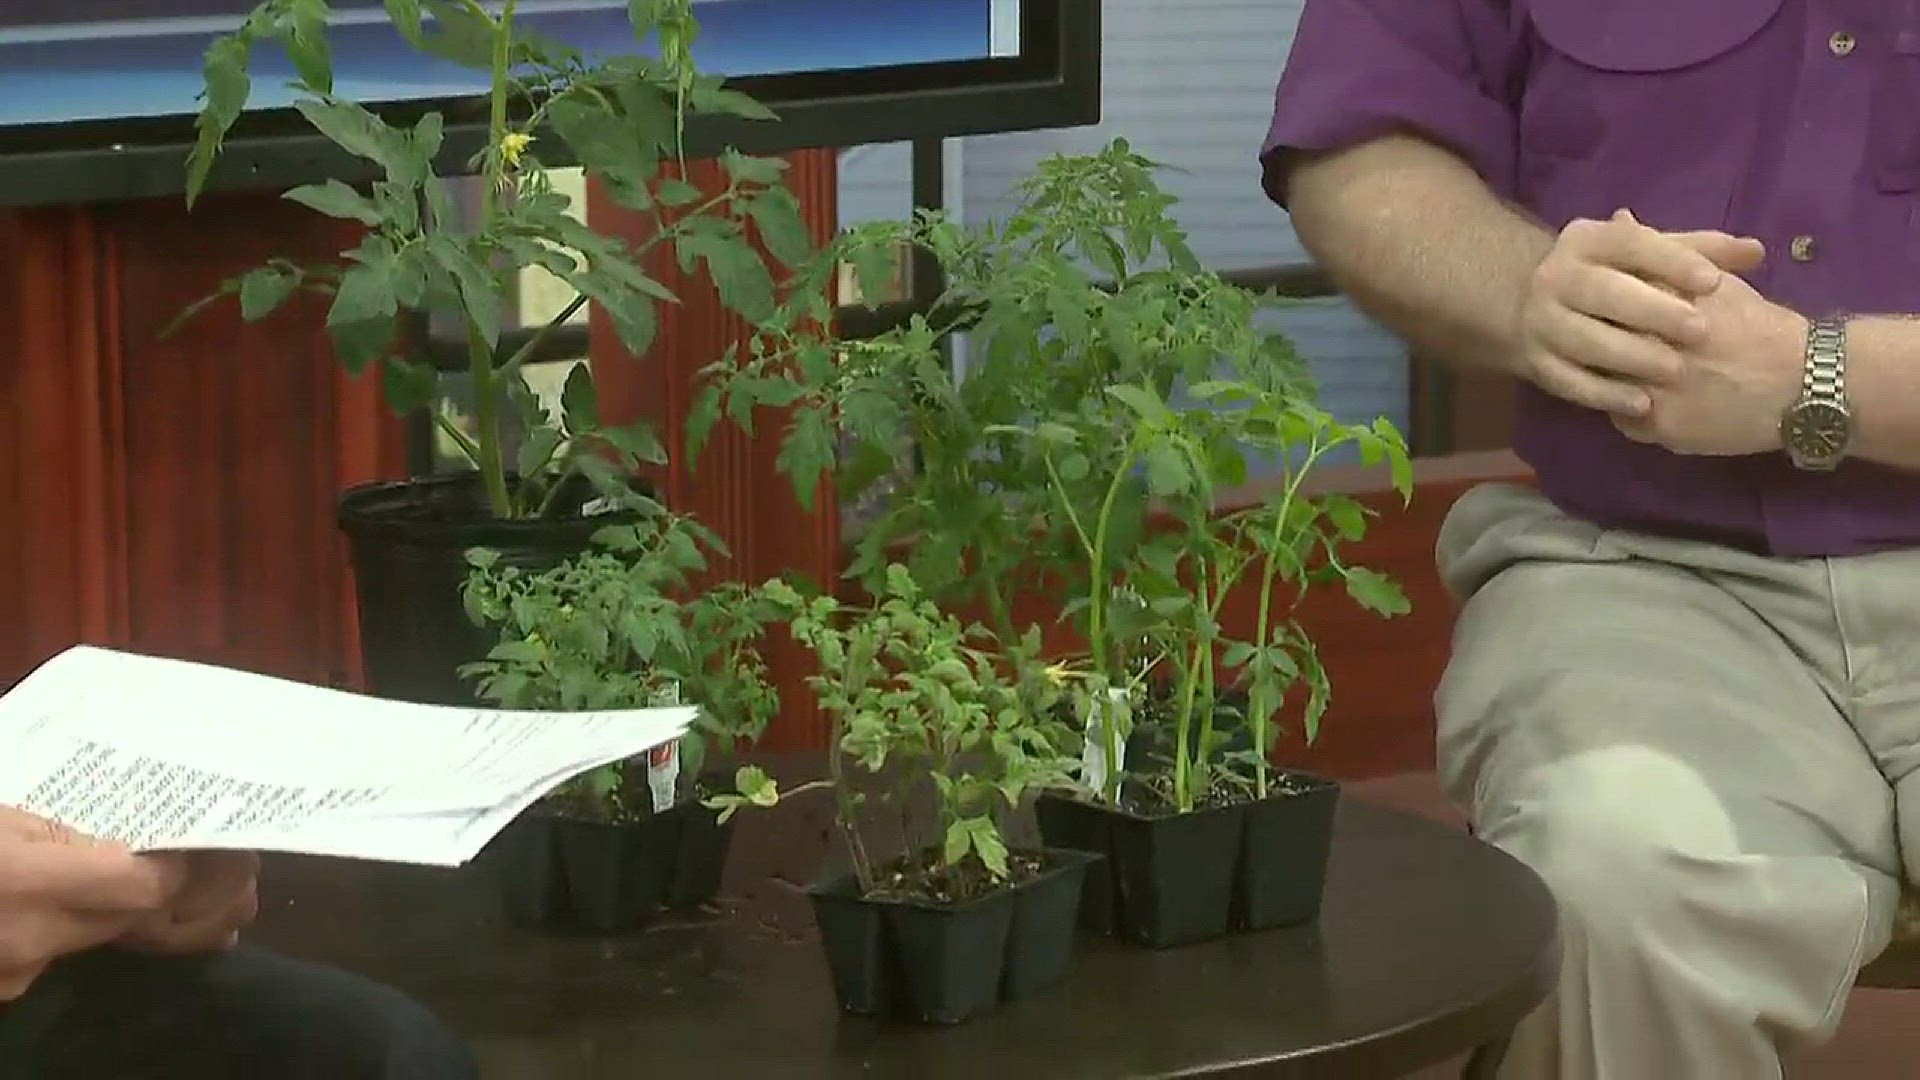 It is time to start thinking about tomatoes if you want to add them to your garden this year. Horticulturist Dan Gill has everything you need to know.